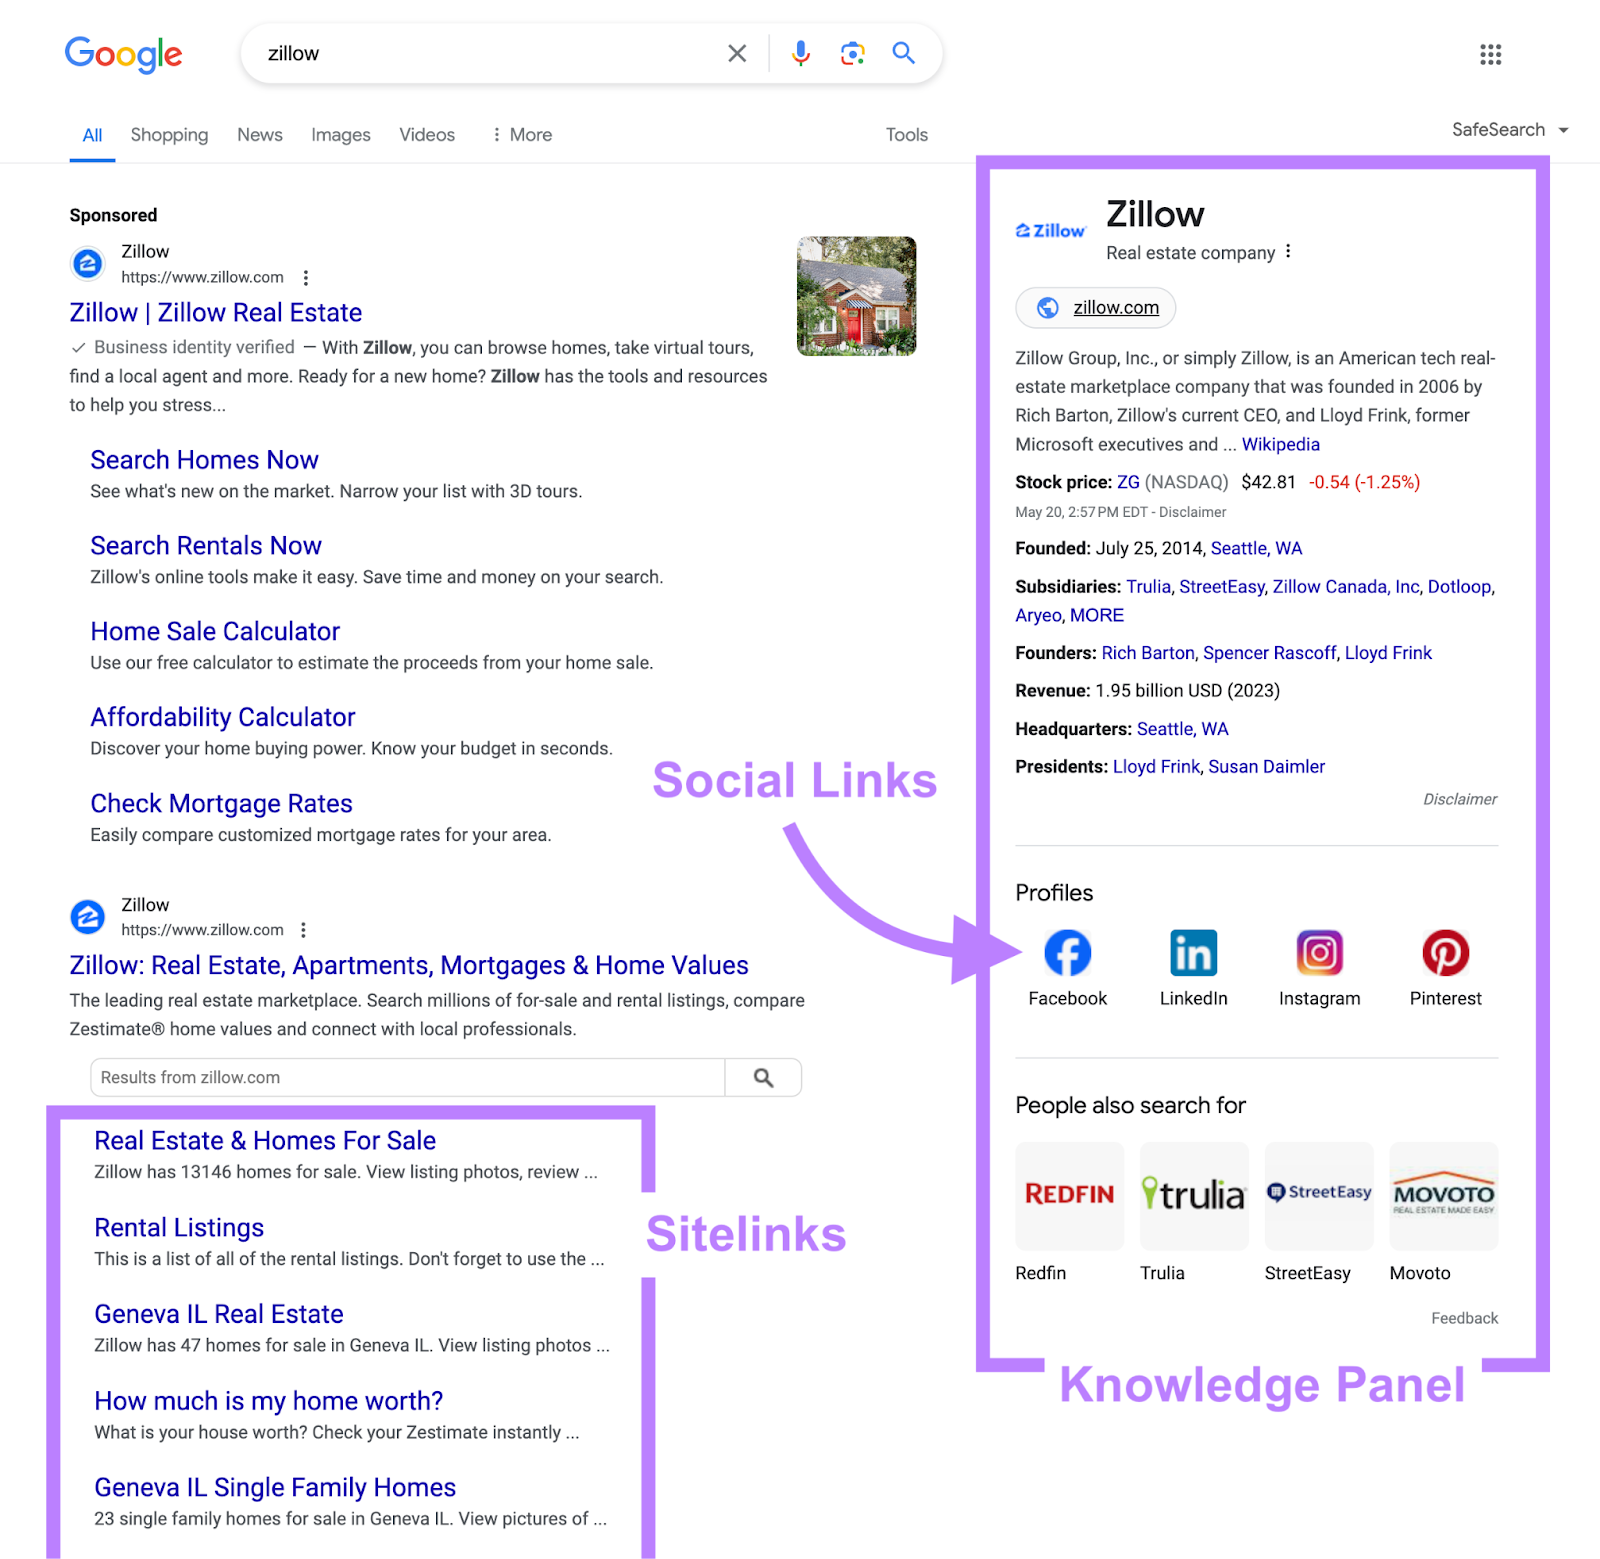 serp for zillow on google with knowledge panel, sitelinks, and social profiles highlighted